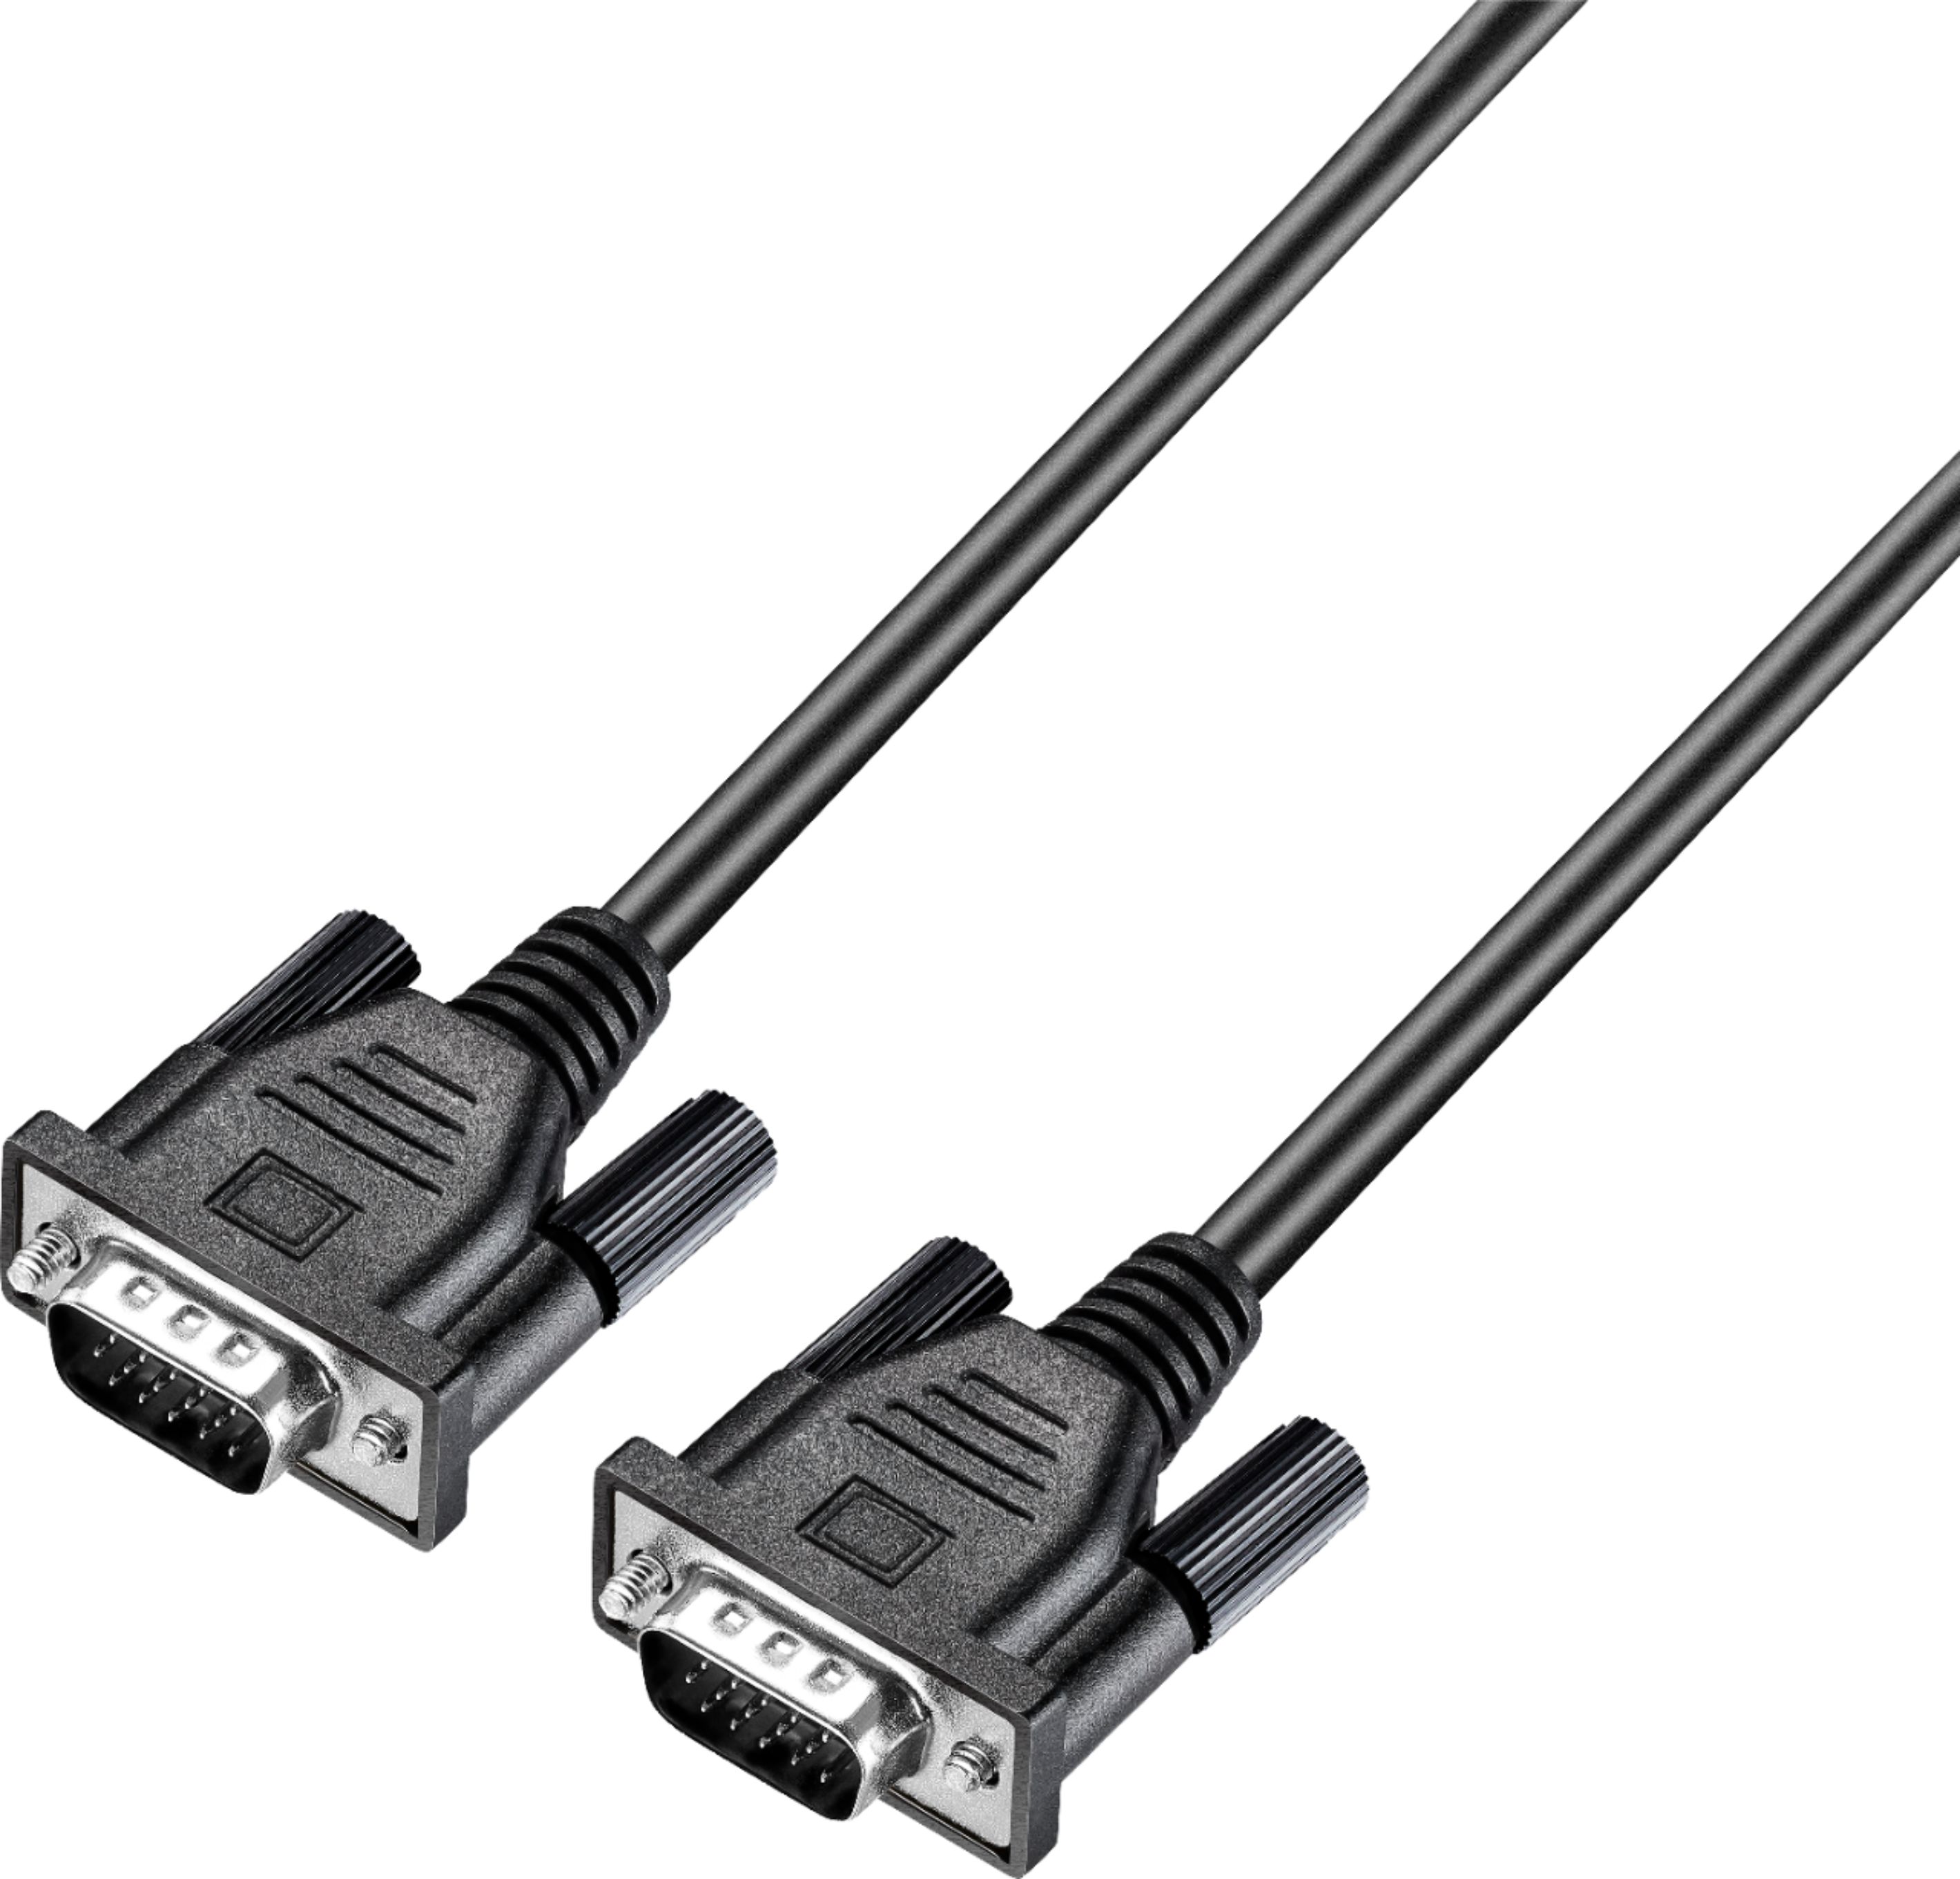 Espinas mensual giratorio Best Buy essentials™ 6' VGA Monitor Cable Black BE-PCVGVG6 - Best Buy